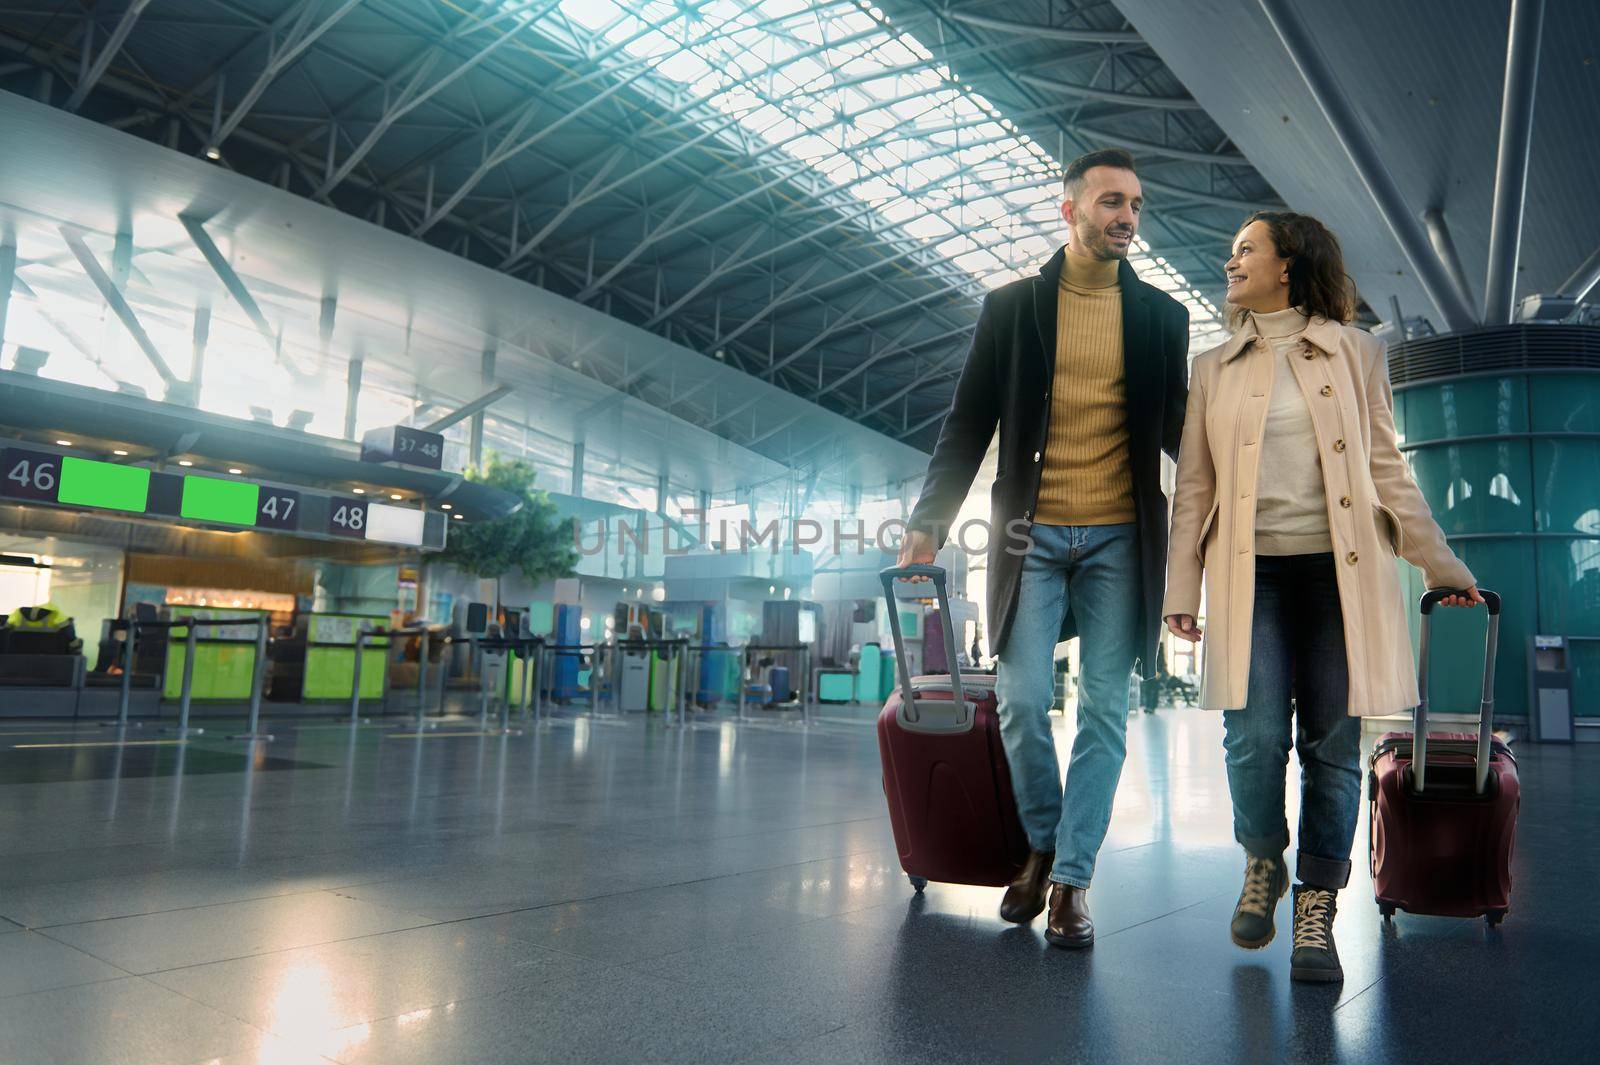 Beautiful couple in love enjoys a joint journey, walks through the departure-arrival hall, waits for customs and passport control at an international airport on the background of flight check-in board by artgf